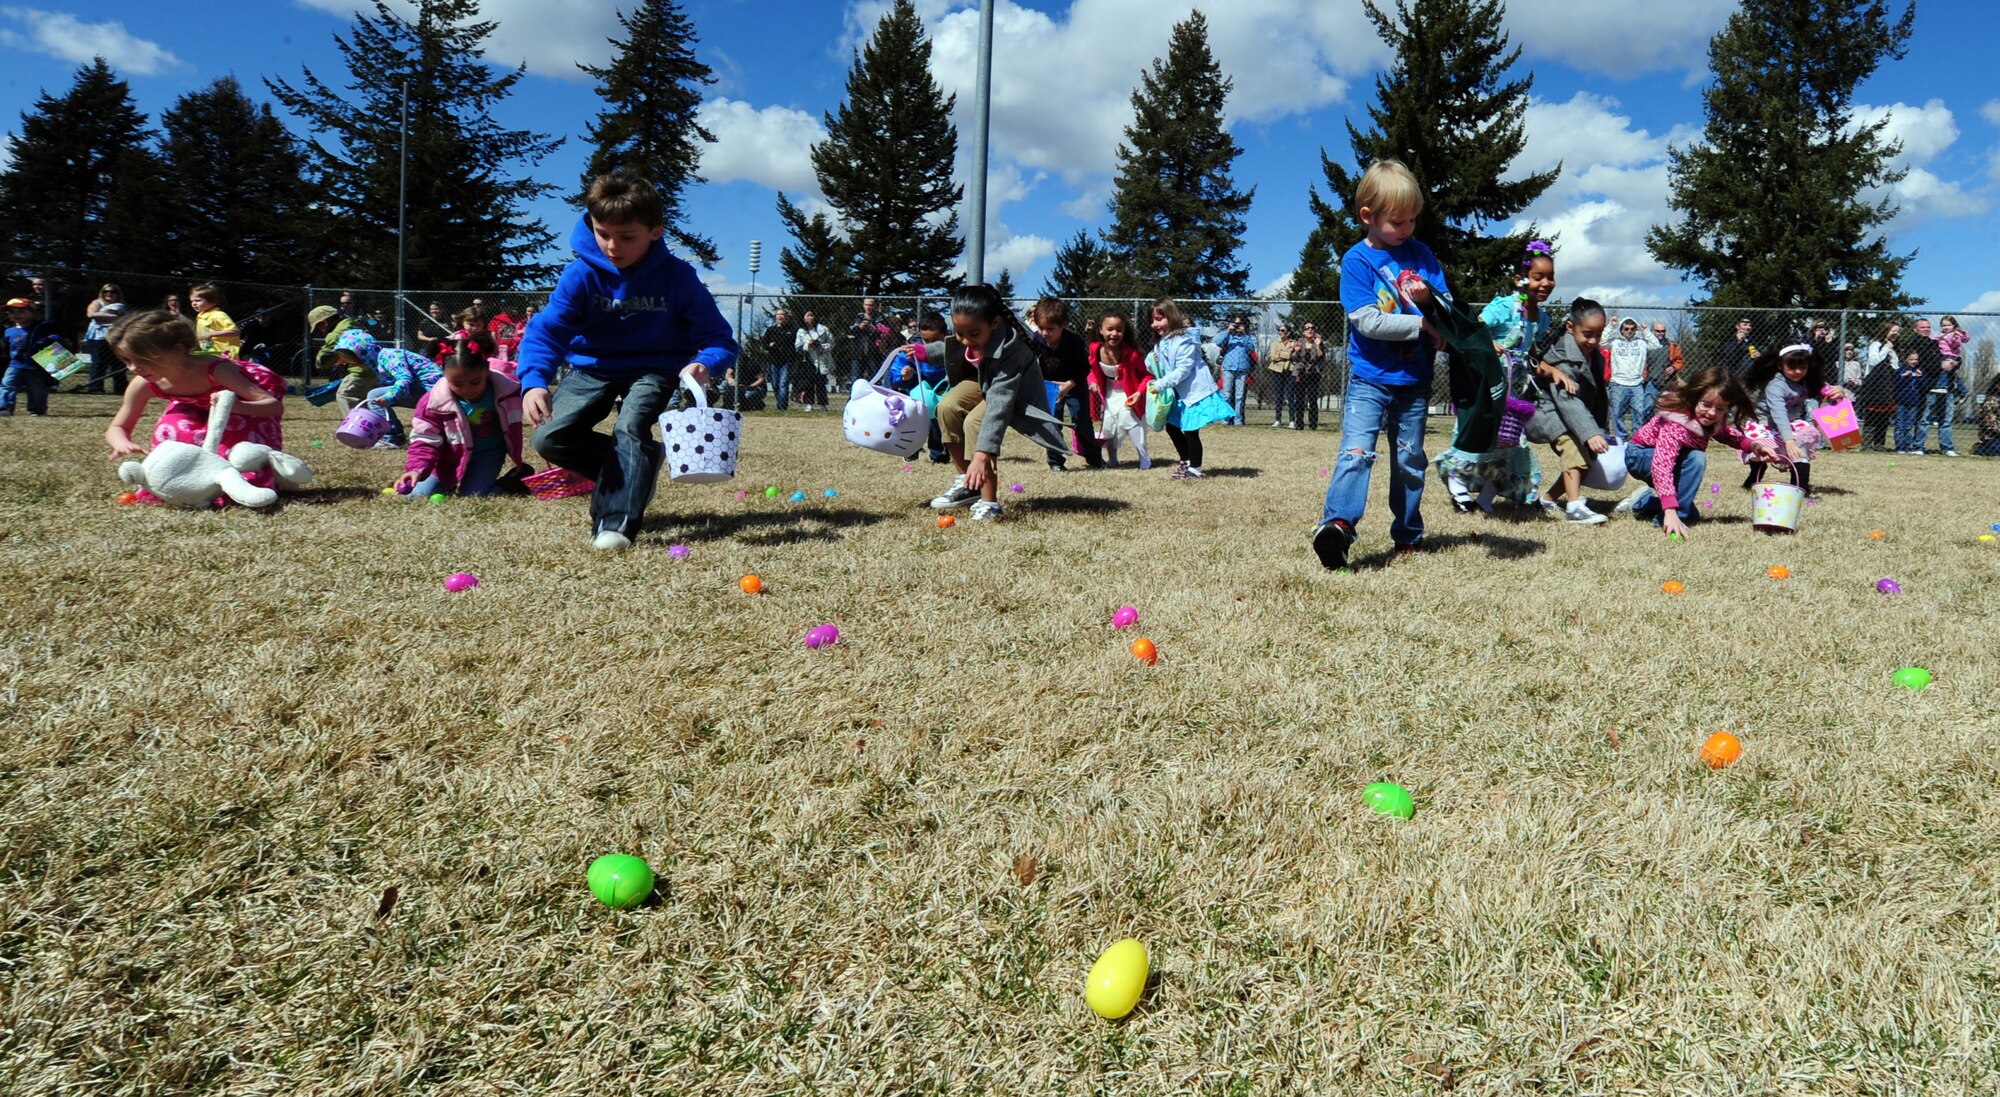 Children, ages 5 to 7, rush forward to retrieve Easter eggs scattered around the baseball field in Miller Park at Fairchild Air Force Base, Wash., April 7, 2012. The Easter egg hunt event was sponsored by Balfour Beatty. There was also a separate egg hunt designed especially for children ages 1 to 4. Prizes were raffled out to children that received eggs with a special ticket located inside. (U.S. Air Force photo by Airman 1st Class Taylor Curry/Released)